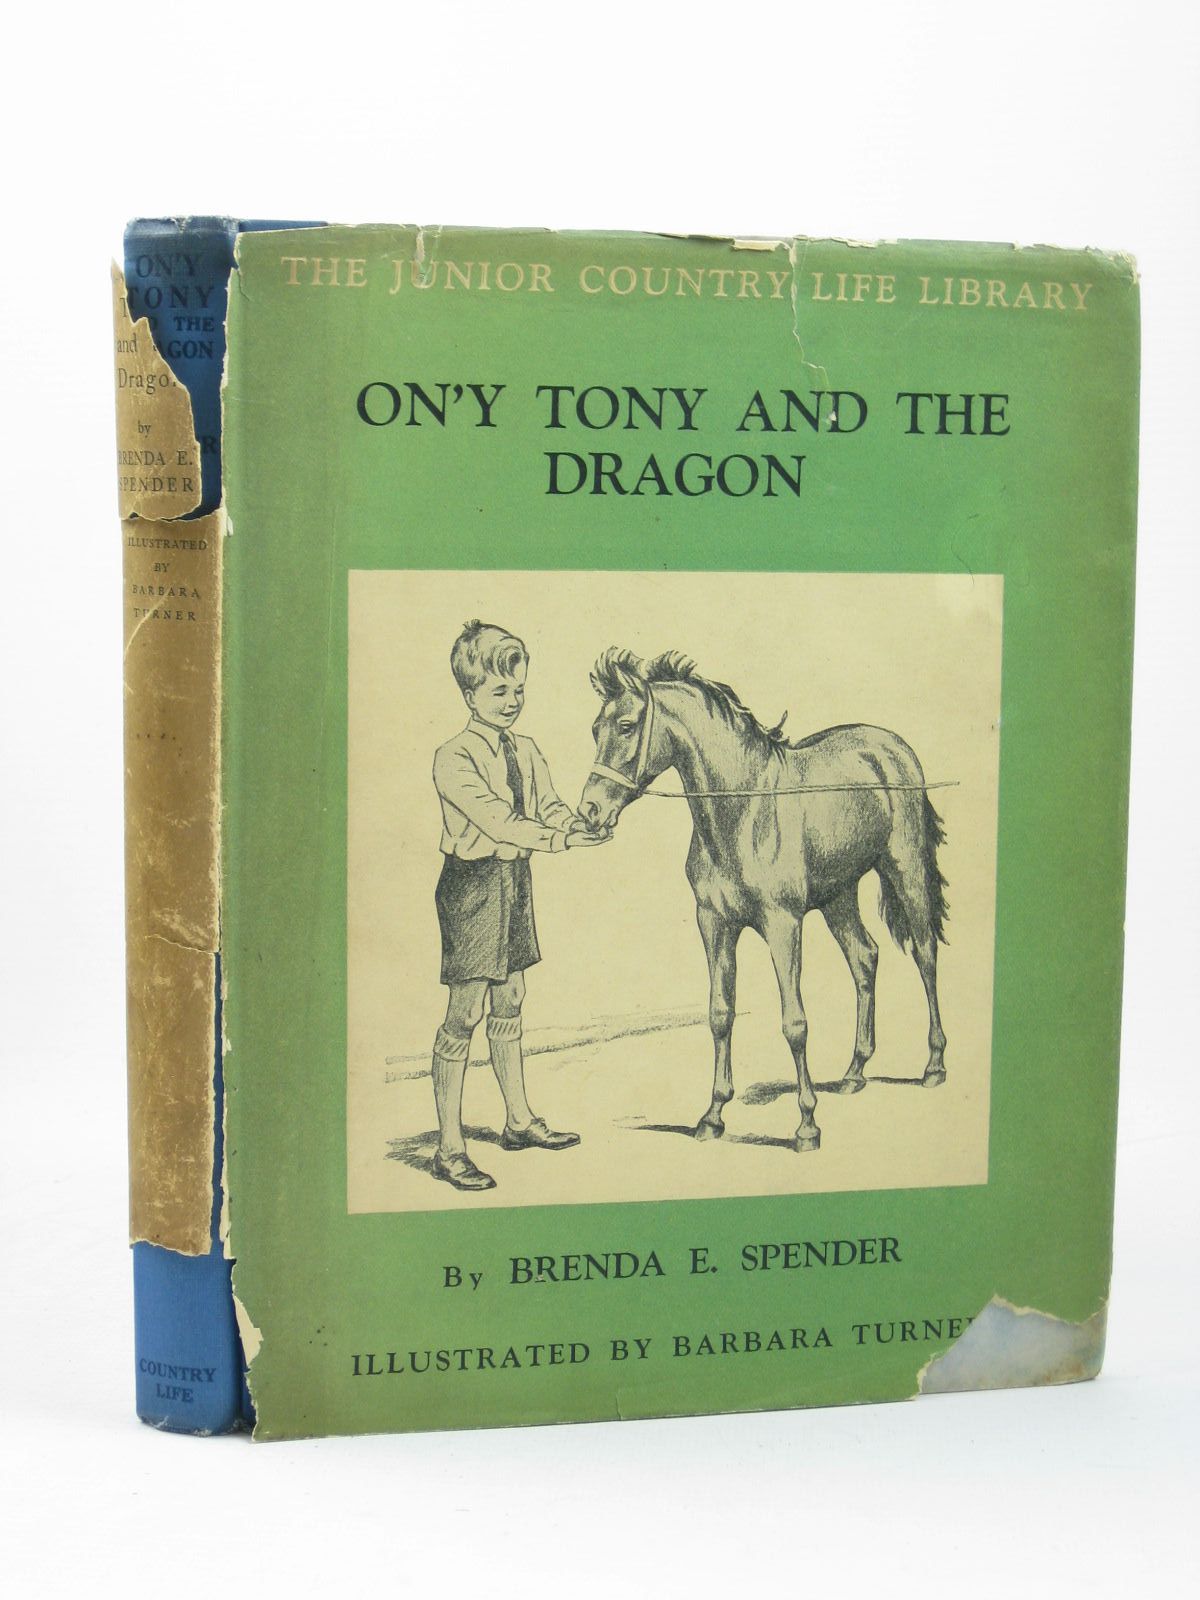 Cover of ON'Y TONY AND THE DRAGON by Brenda E. Spender